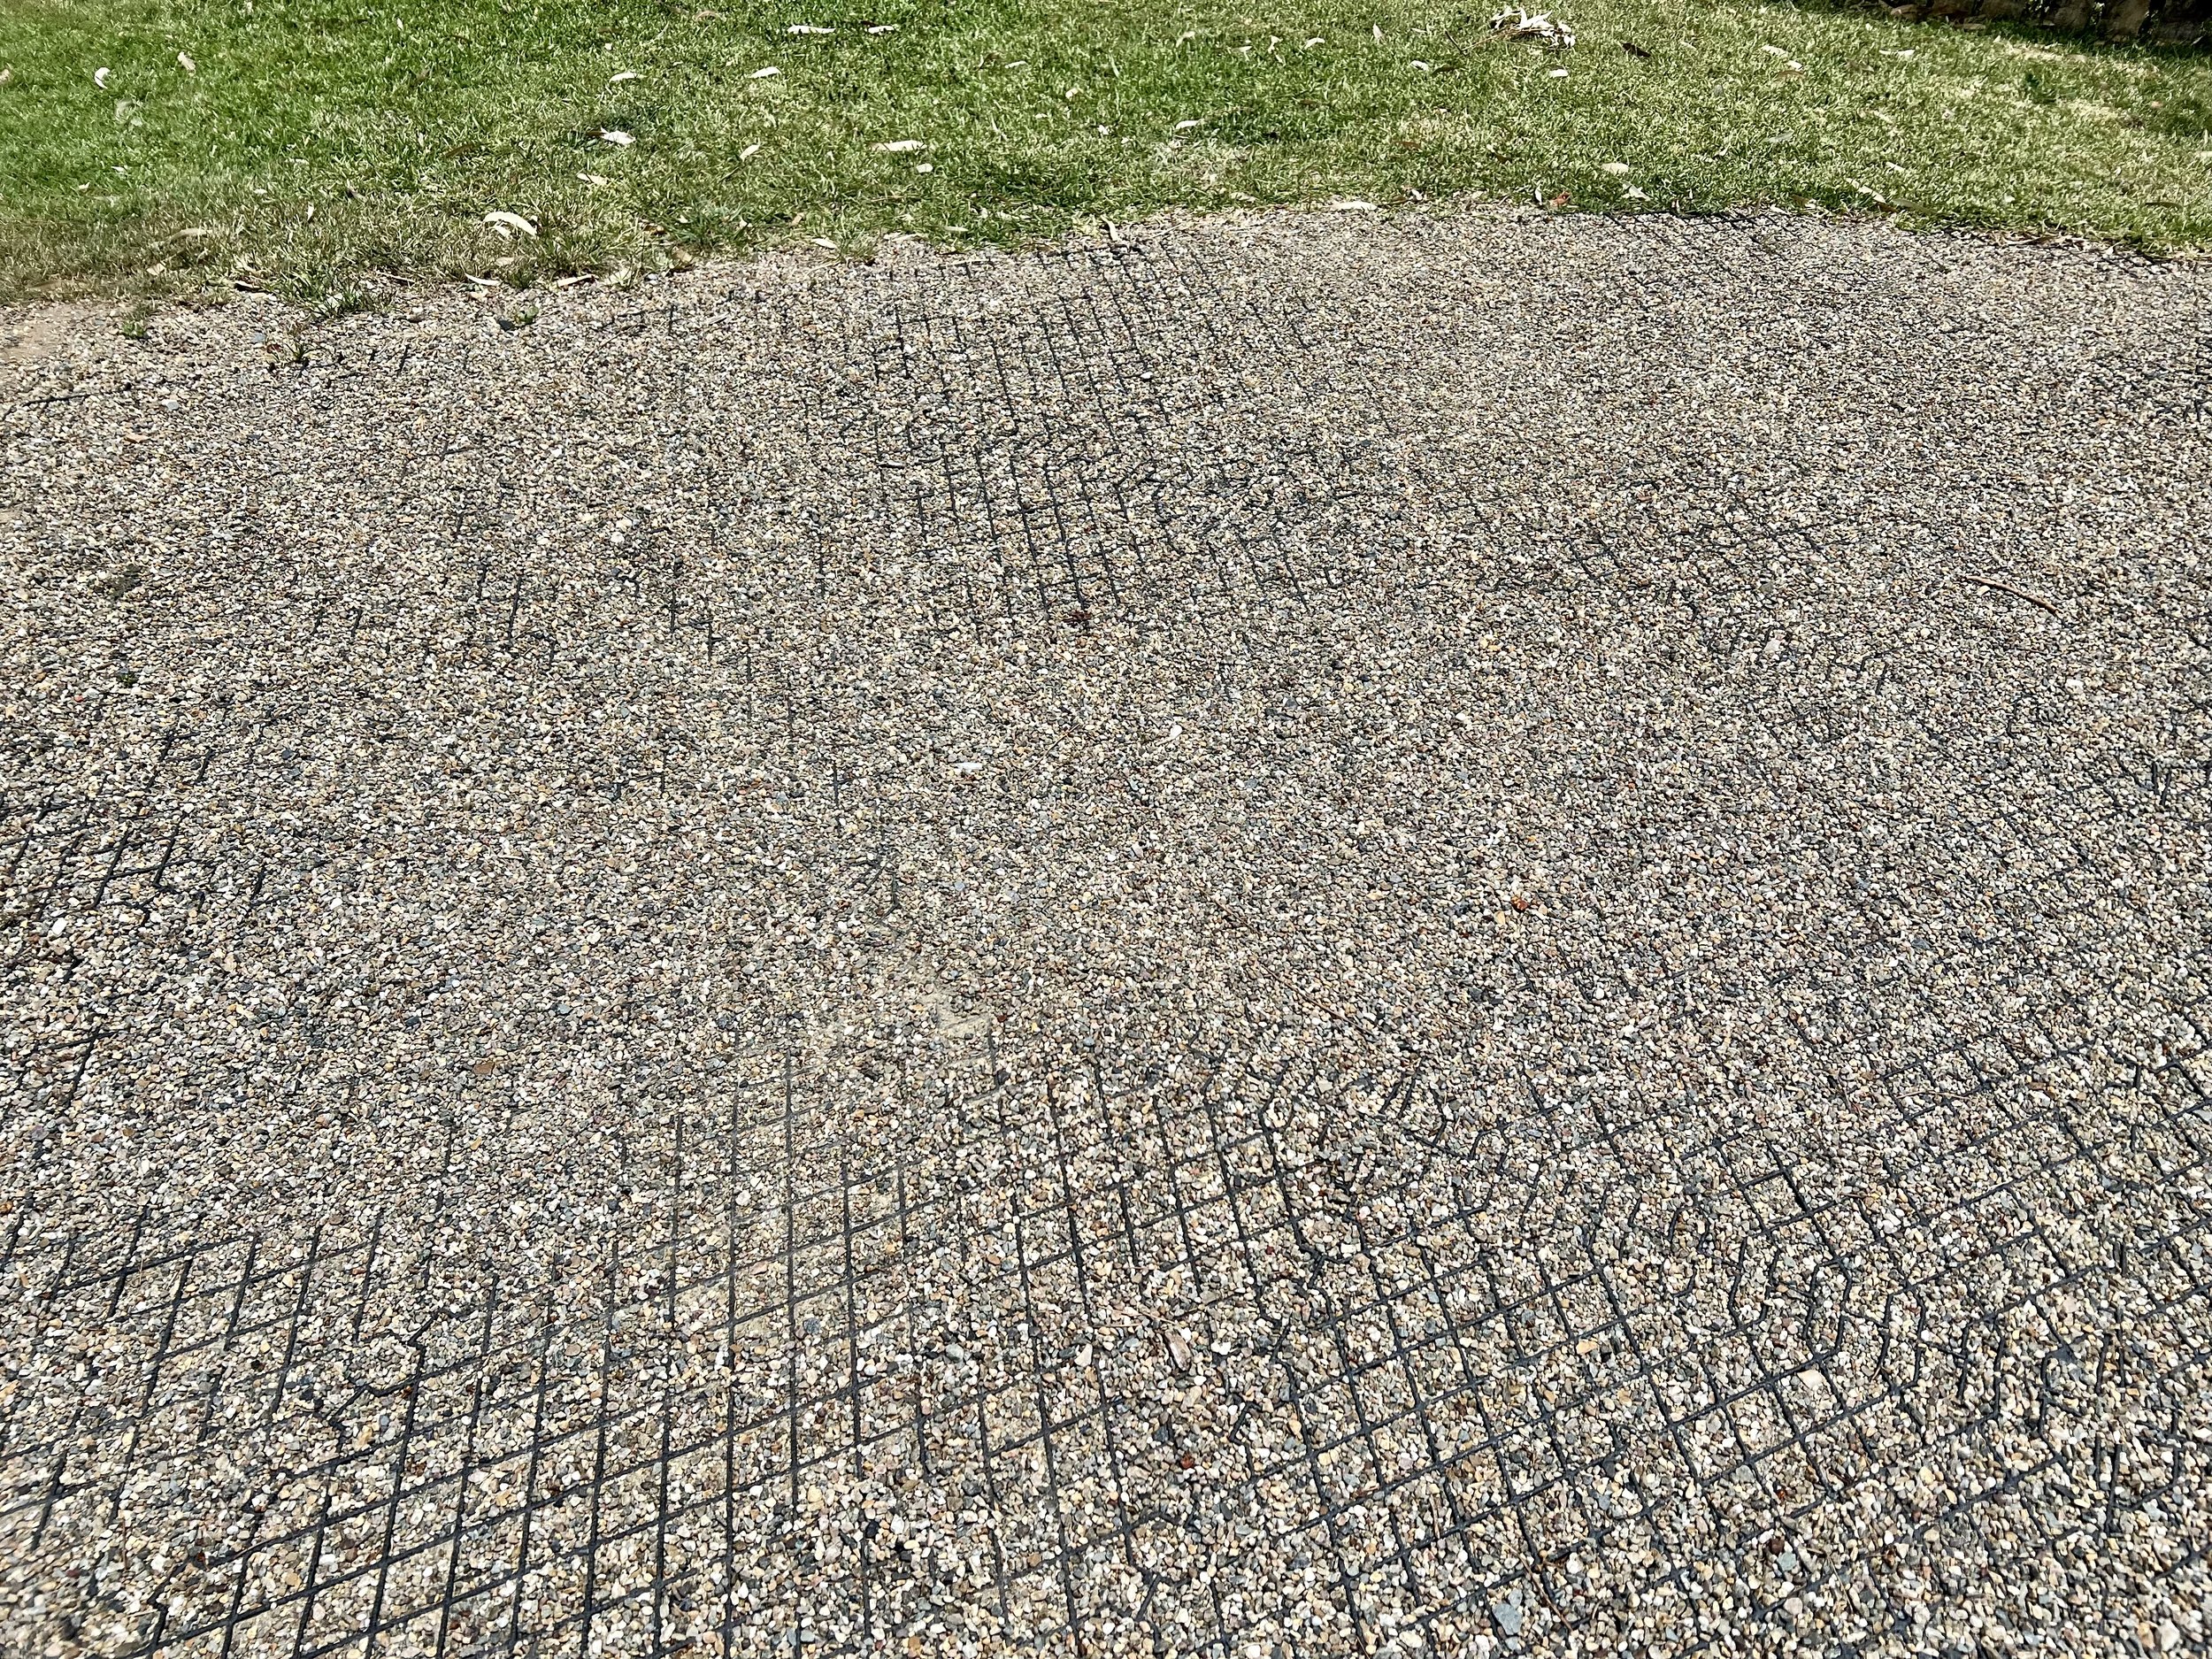 Gravel driveway reinforced for mobility stability